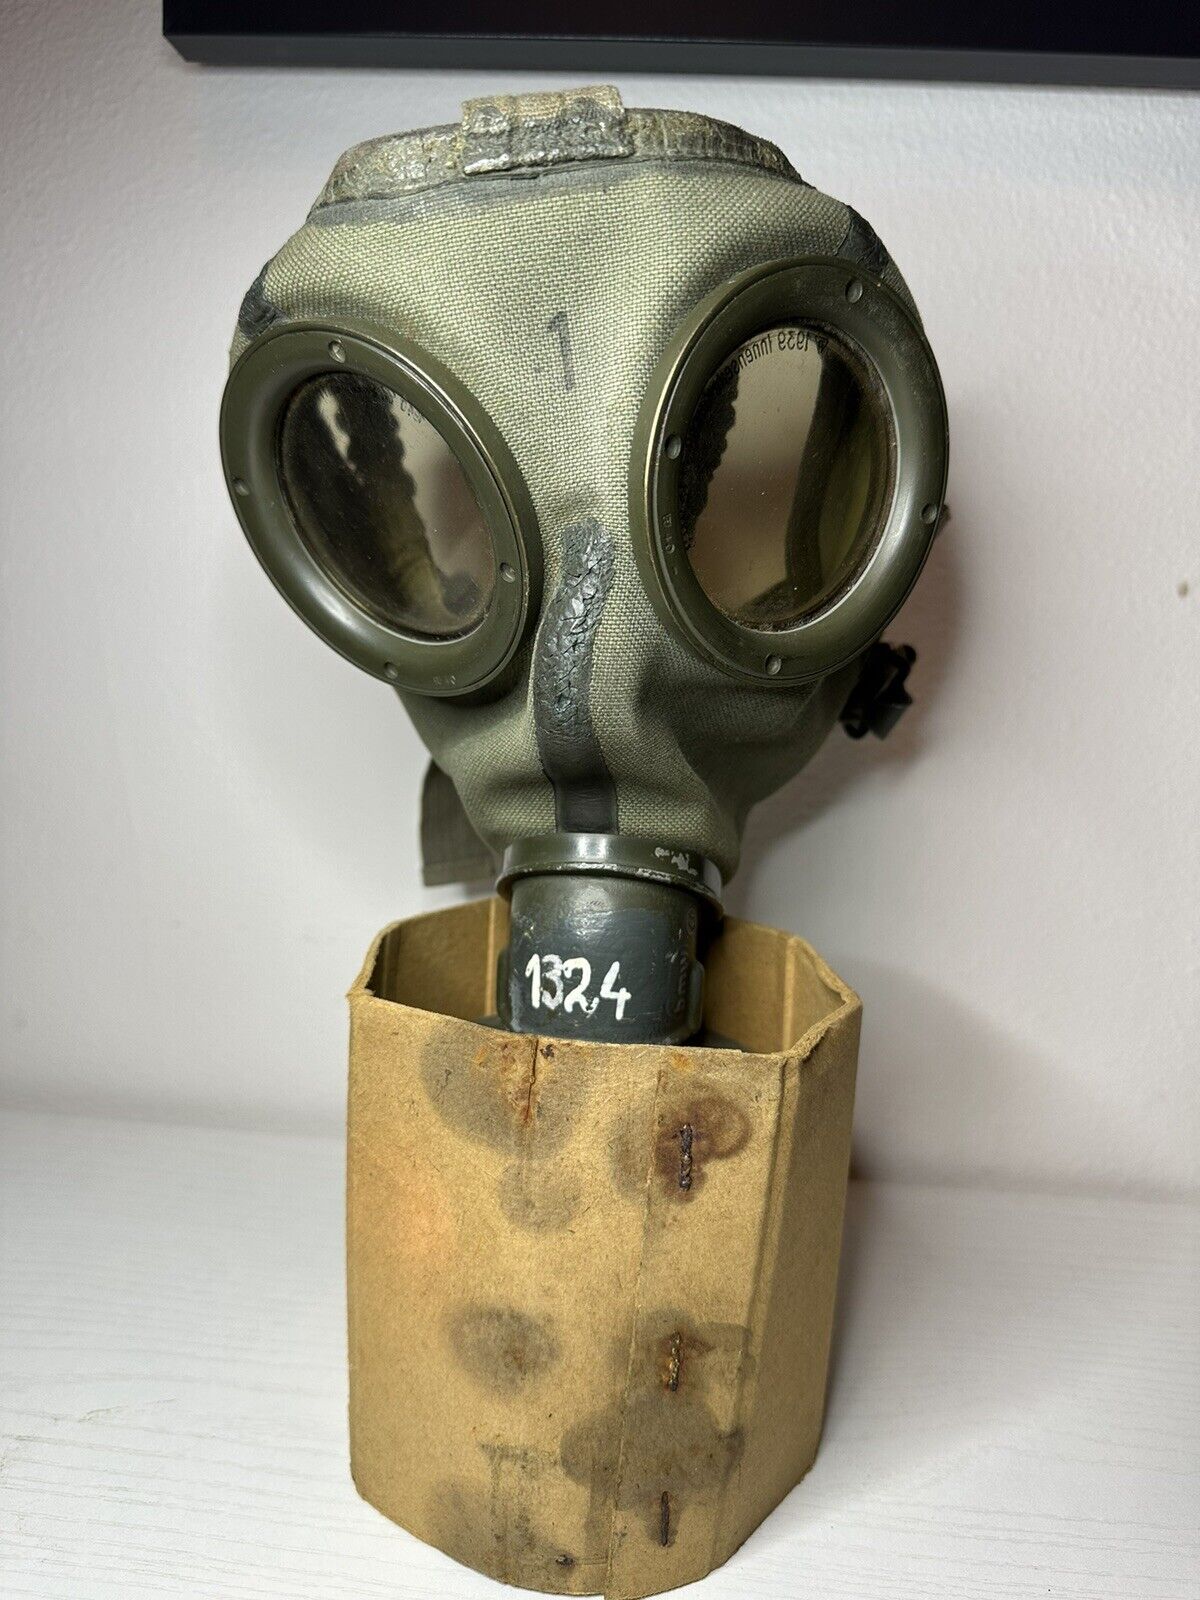 Original WW2 German Gas Mask w Original Canister and Packaging